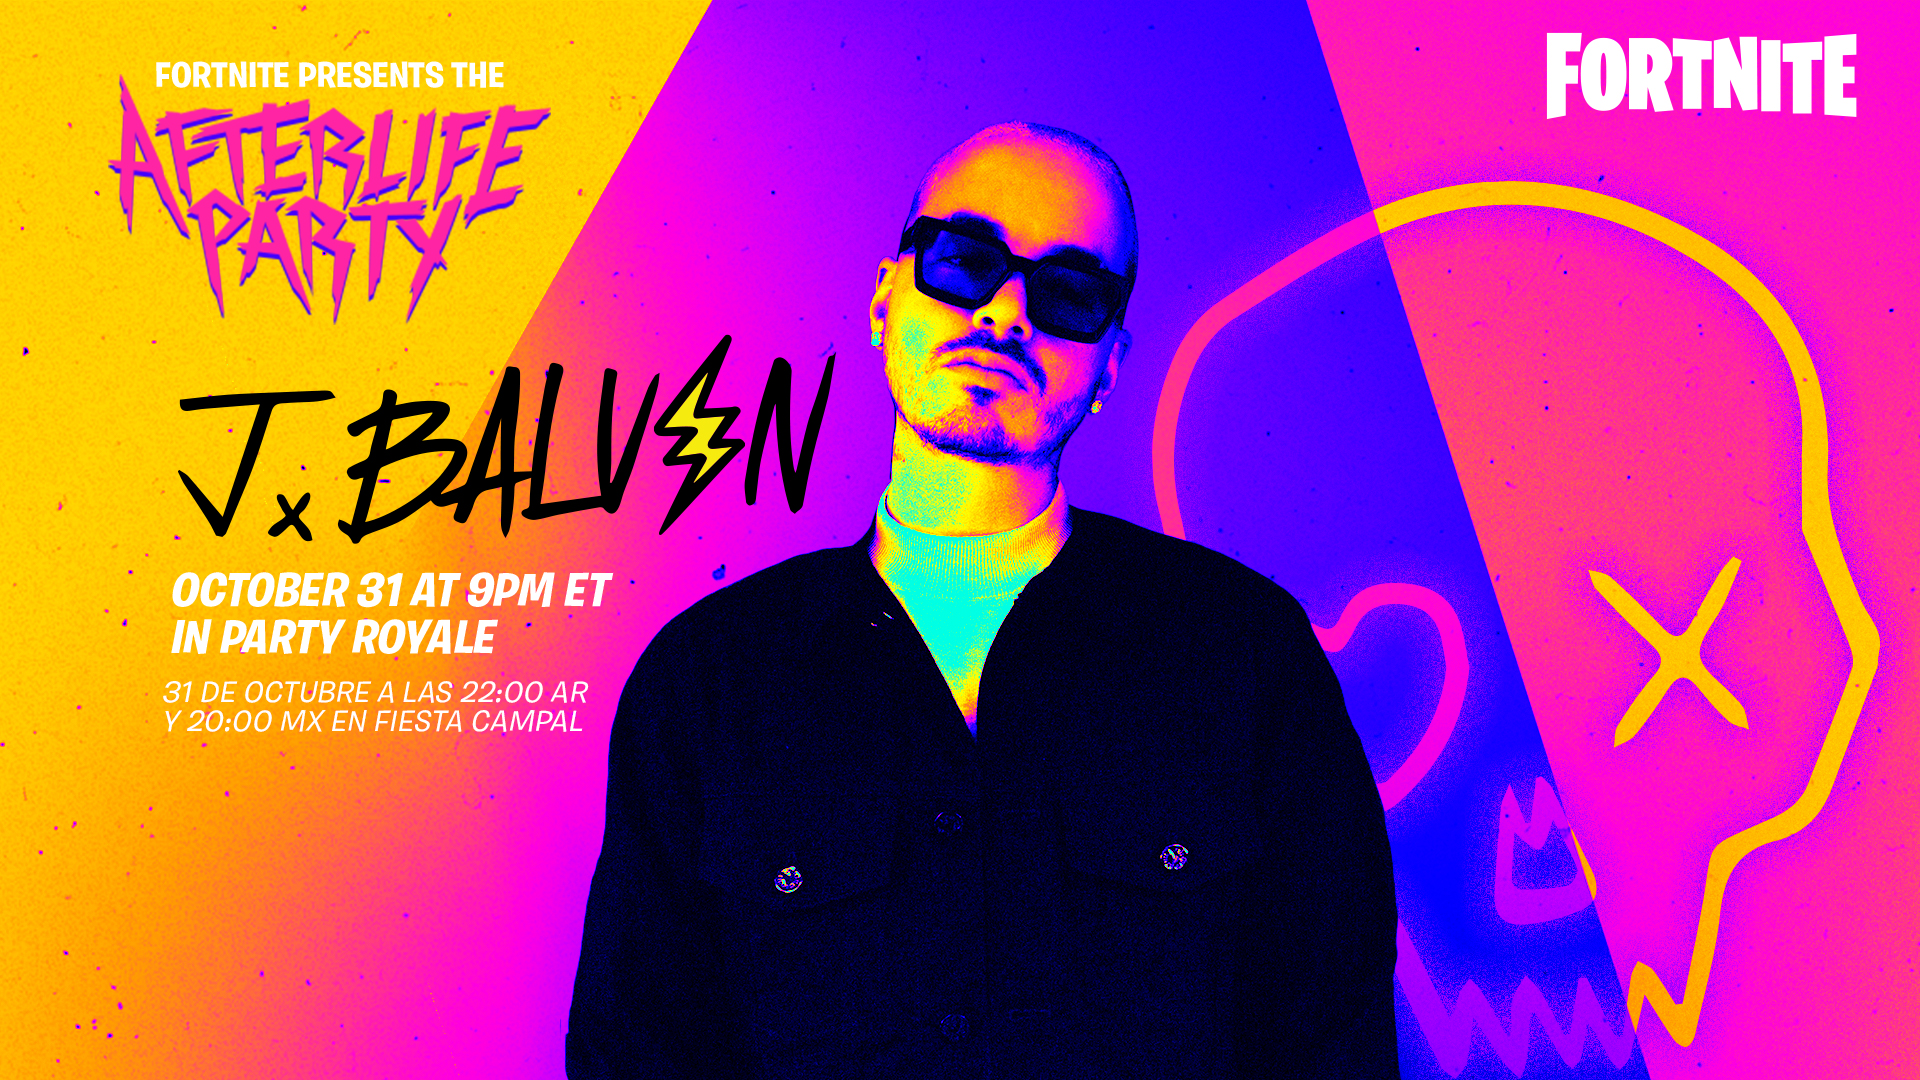 J Balvin Will Play a Fortnite Show on Halloween